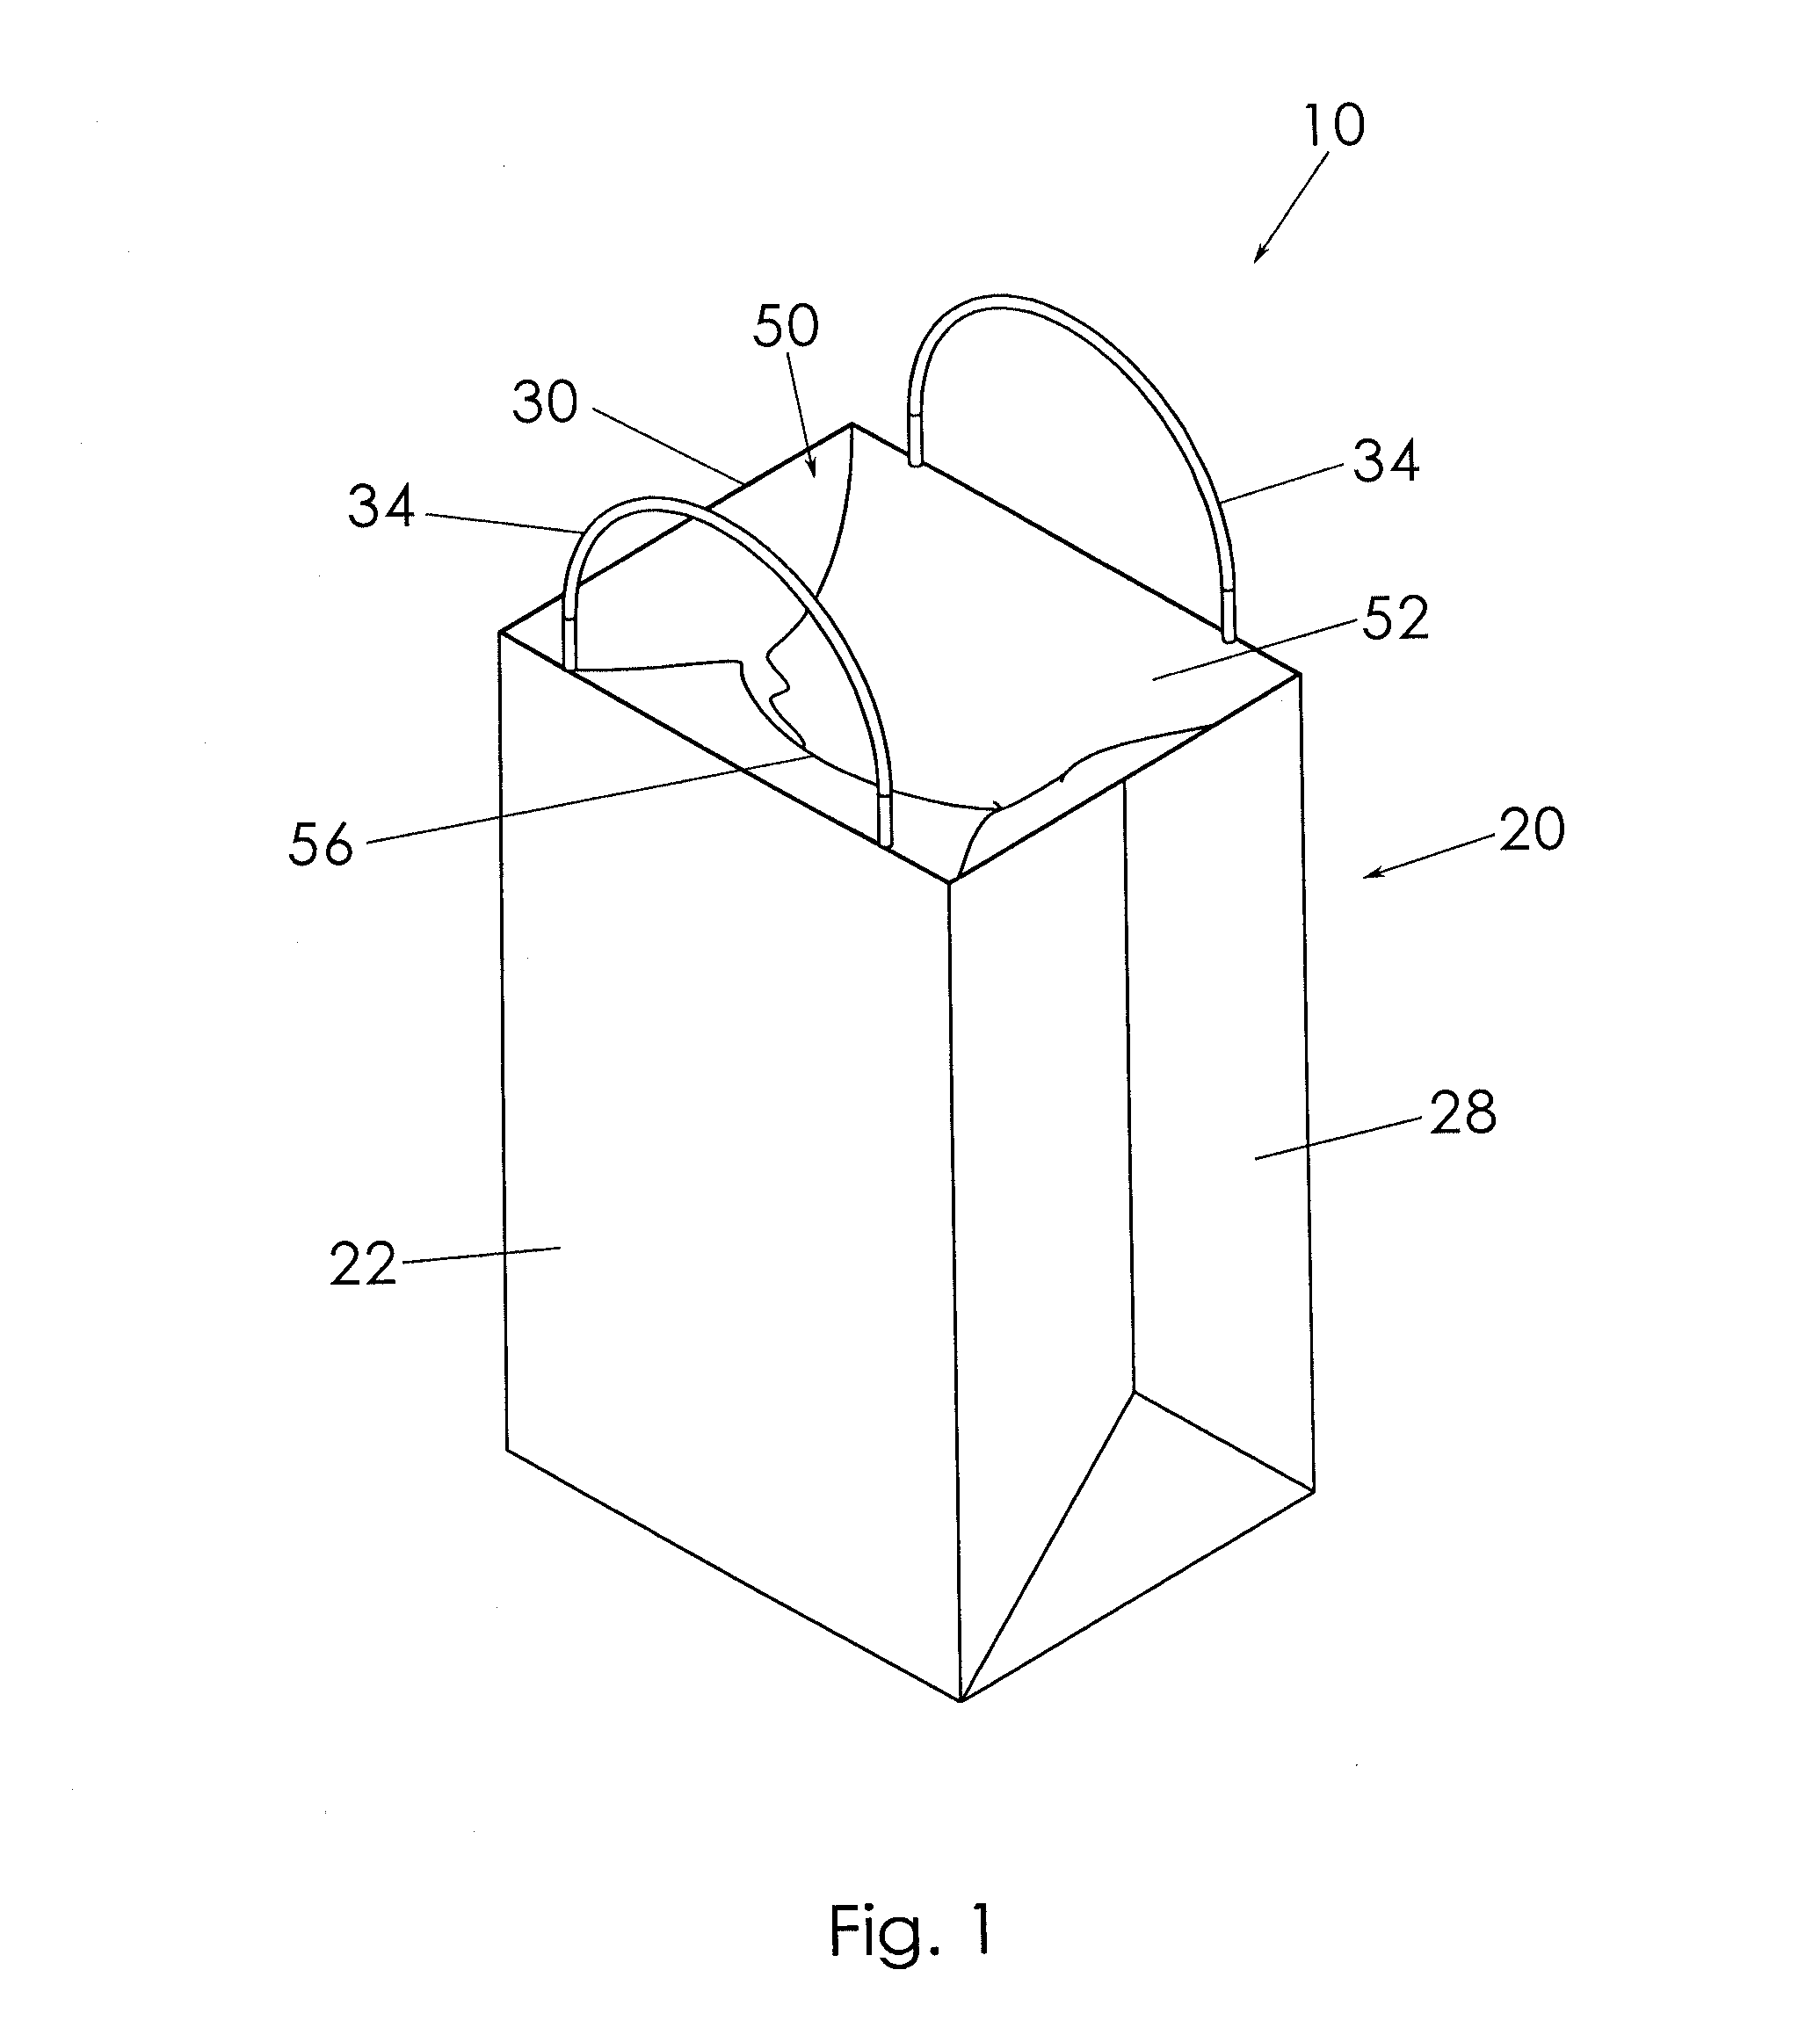 Animal waste collection apparatus and method of use